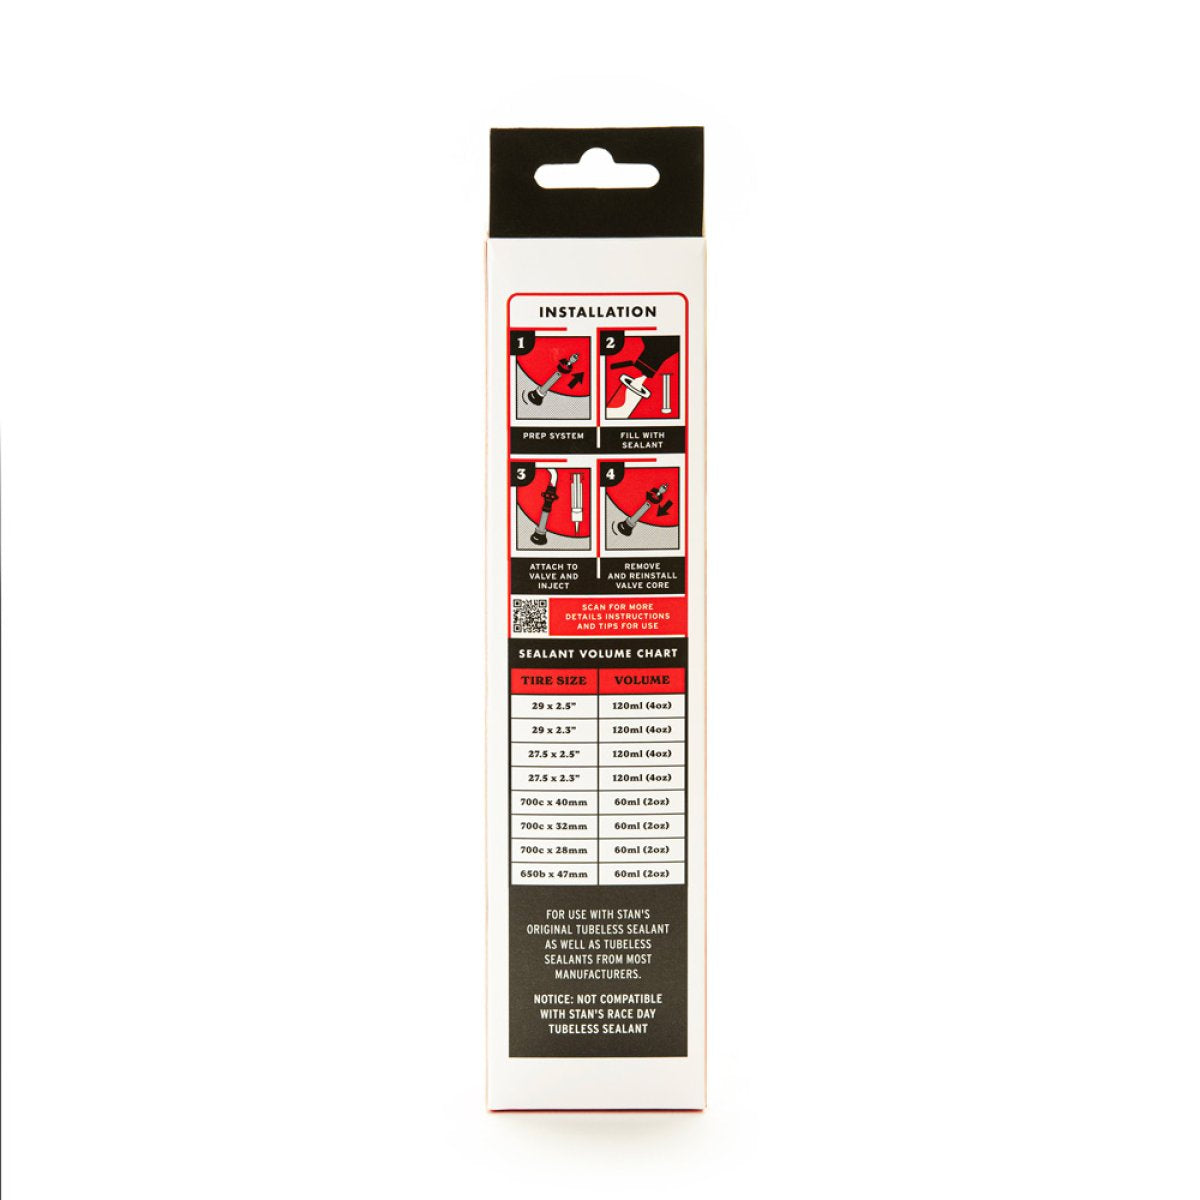 Stans NoTubes Tyre Sealant Injector